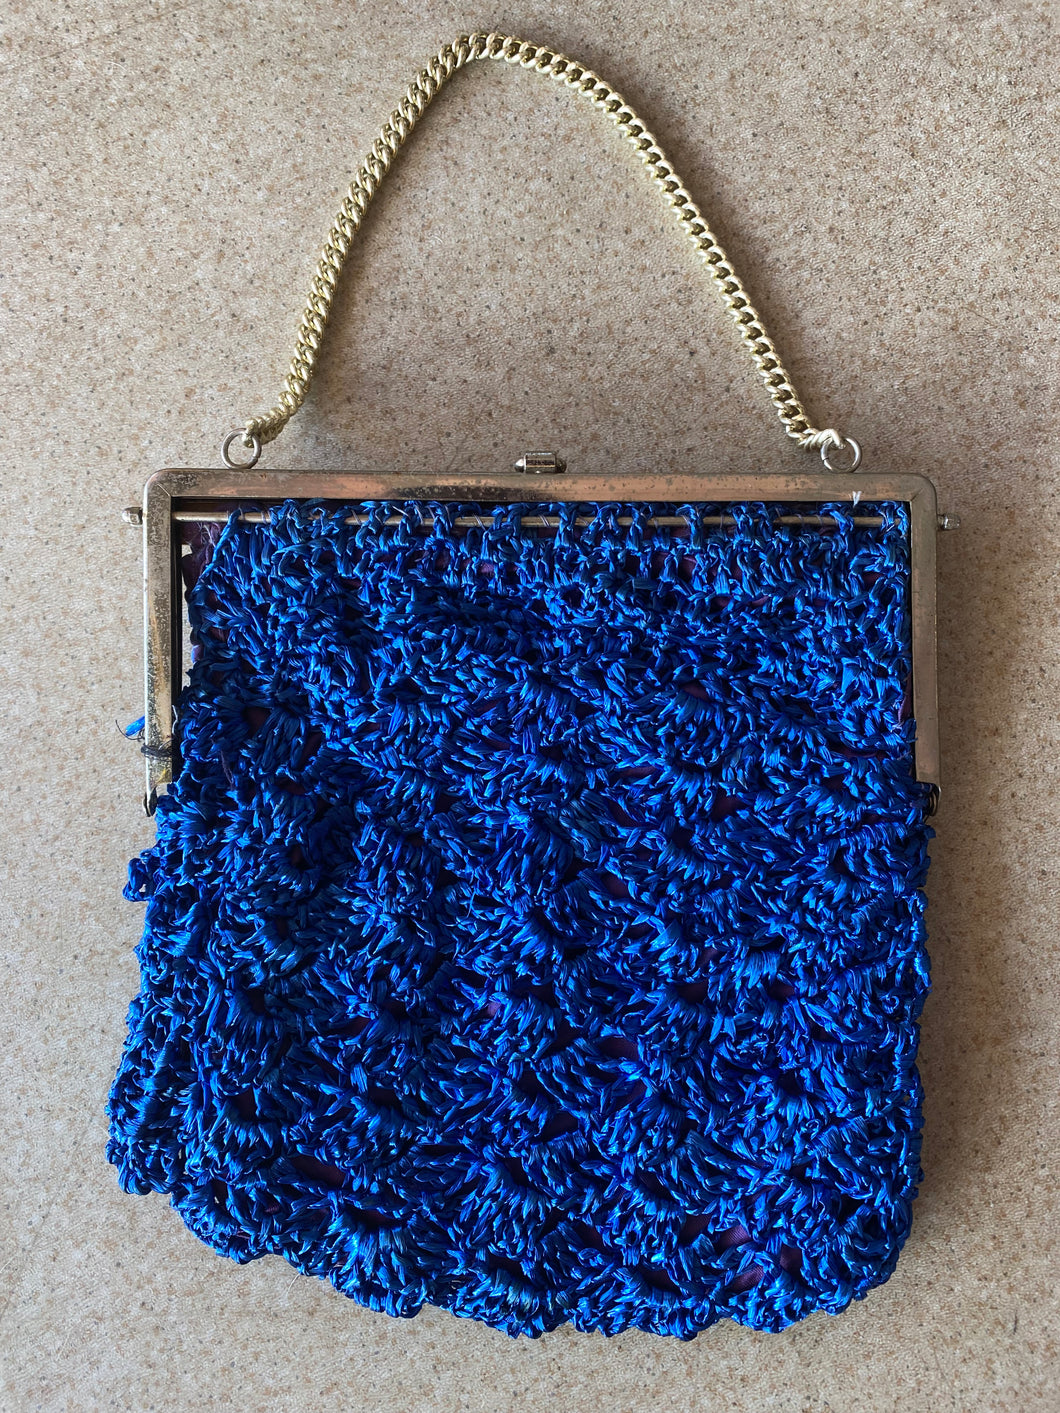 Blue Bag With Silver Chain